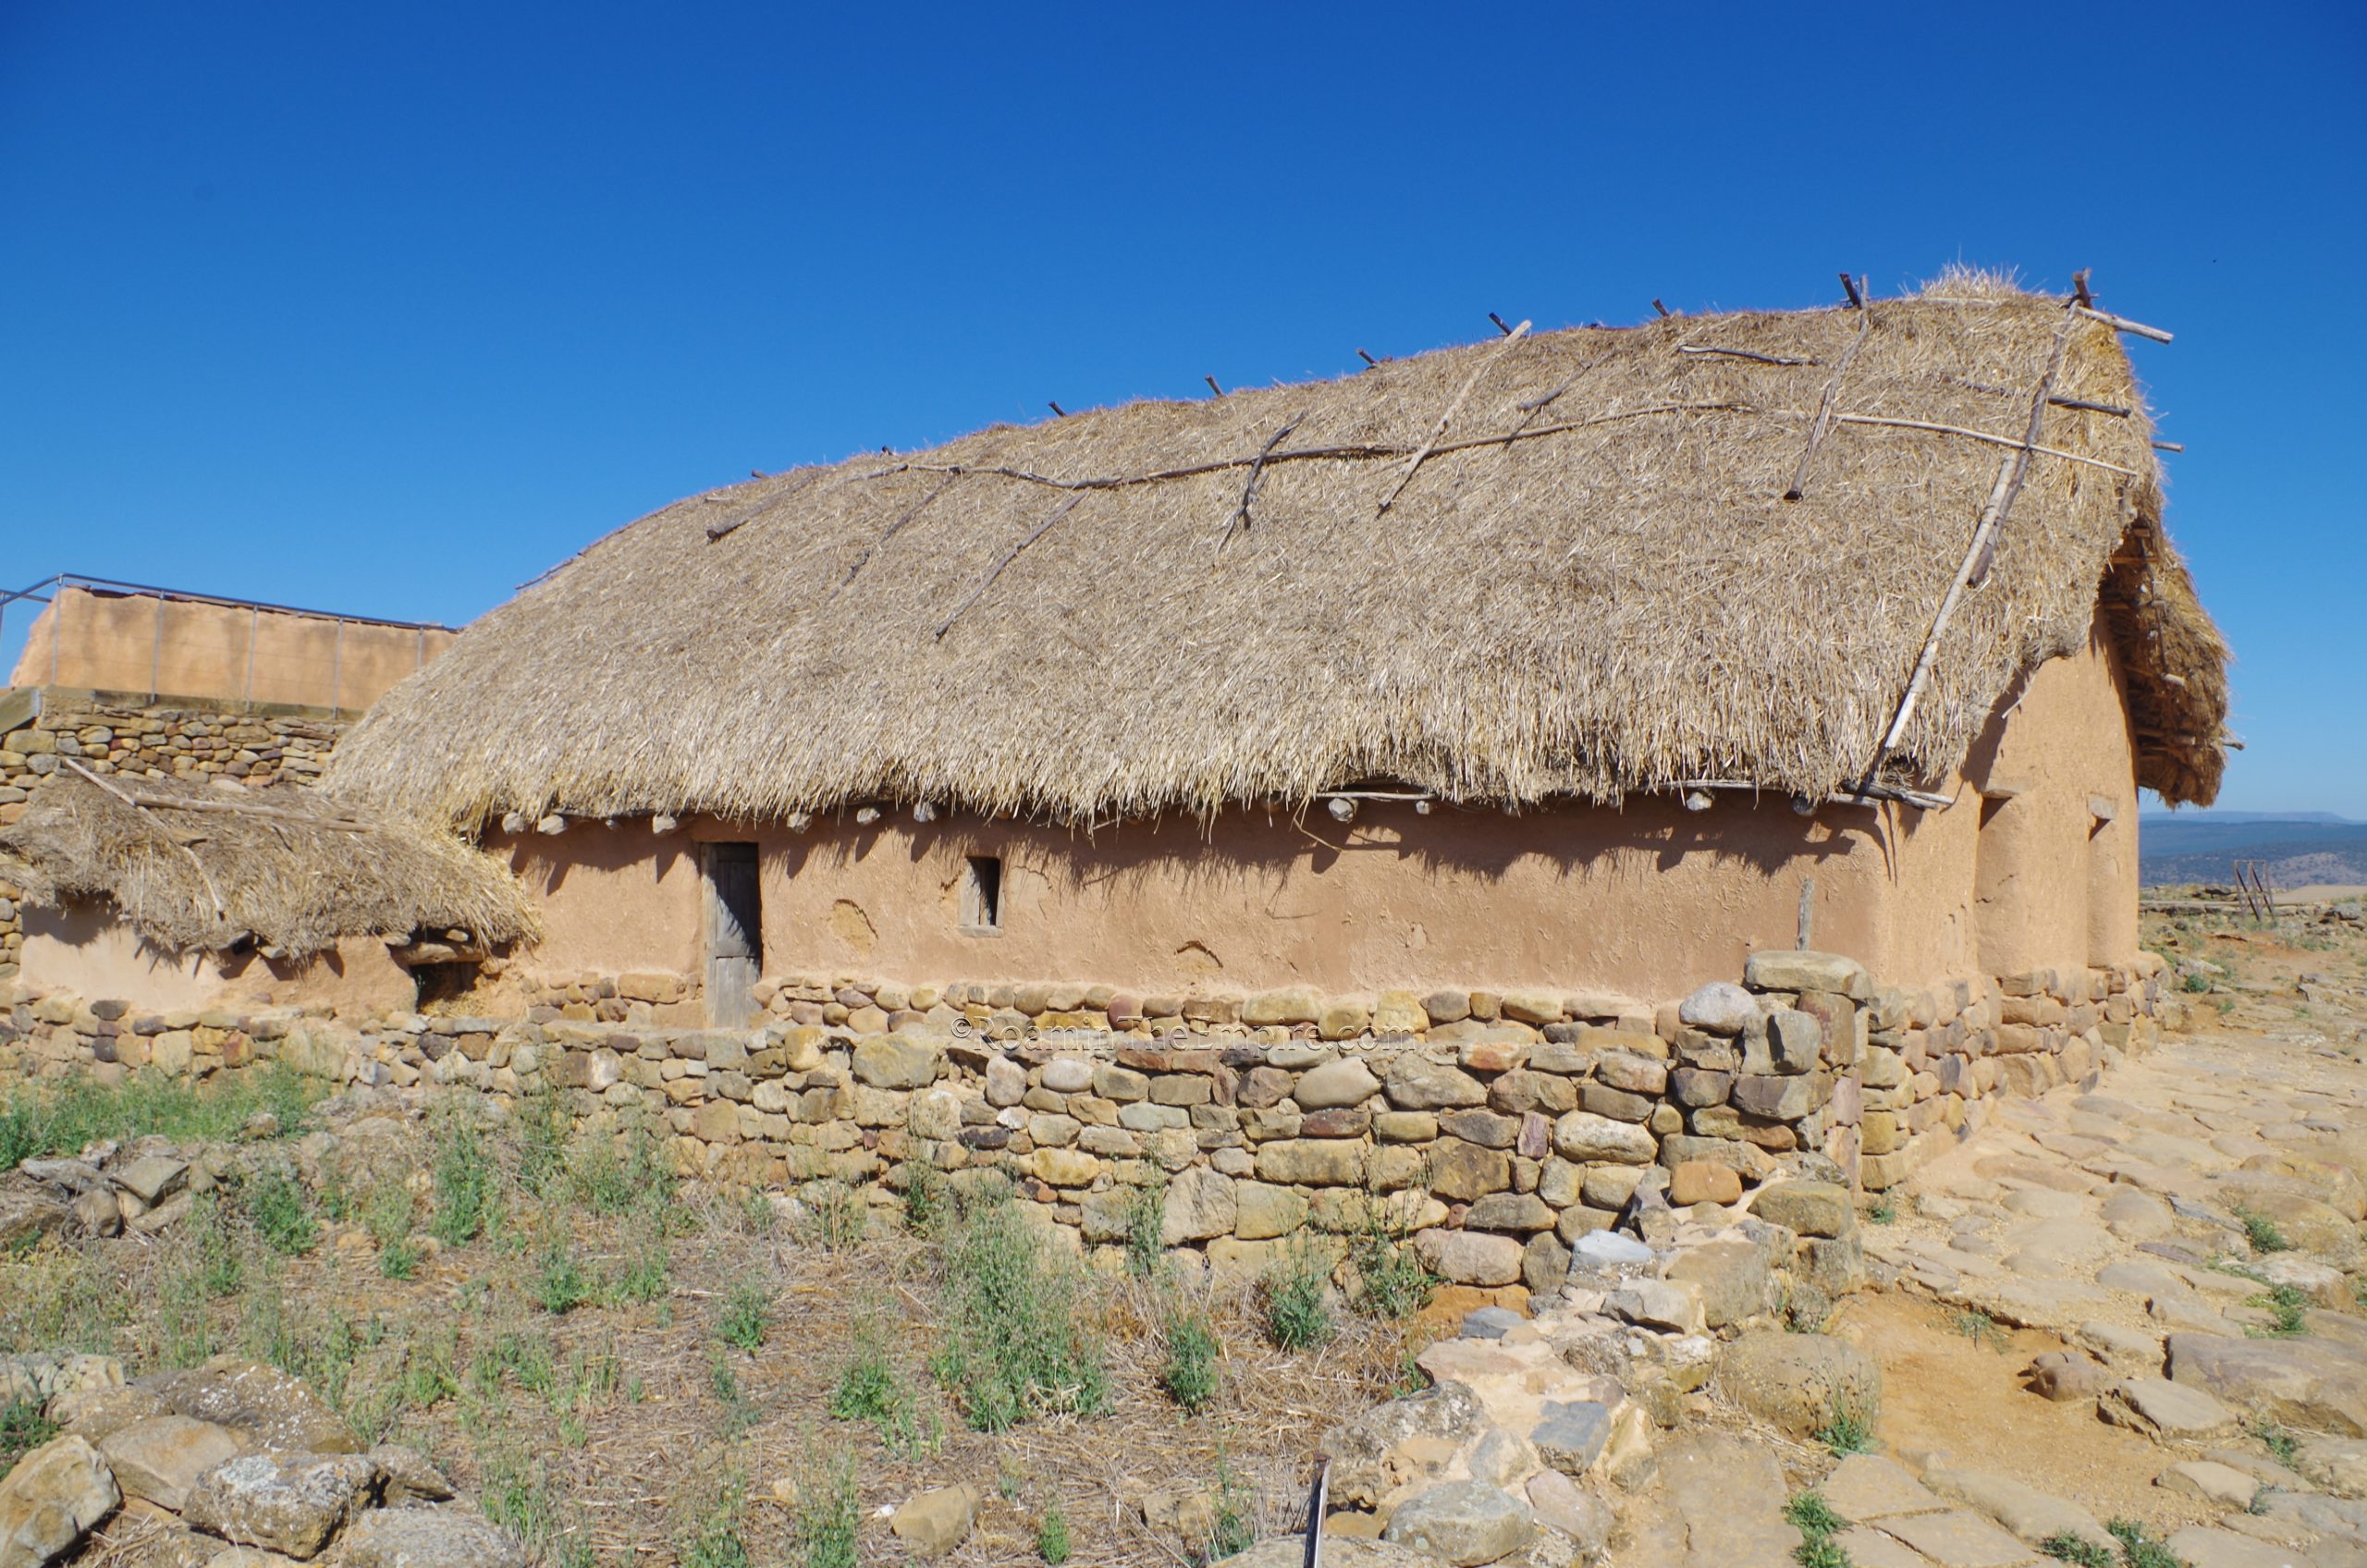 Reconstructed Celtiberian wall and house.